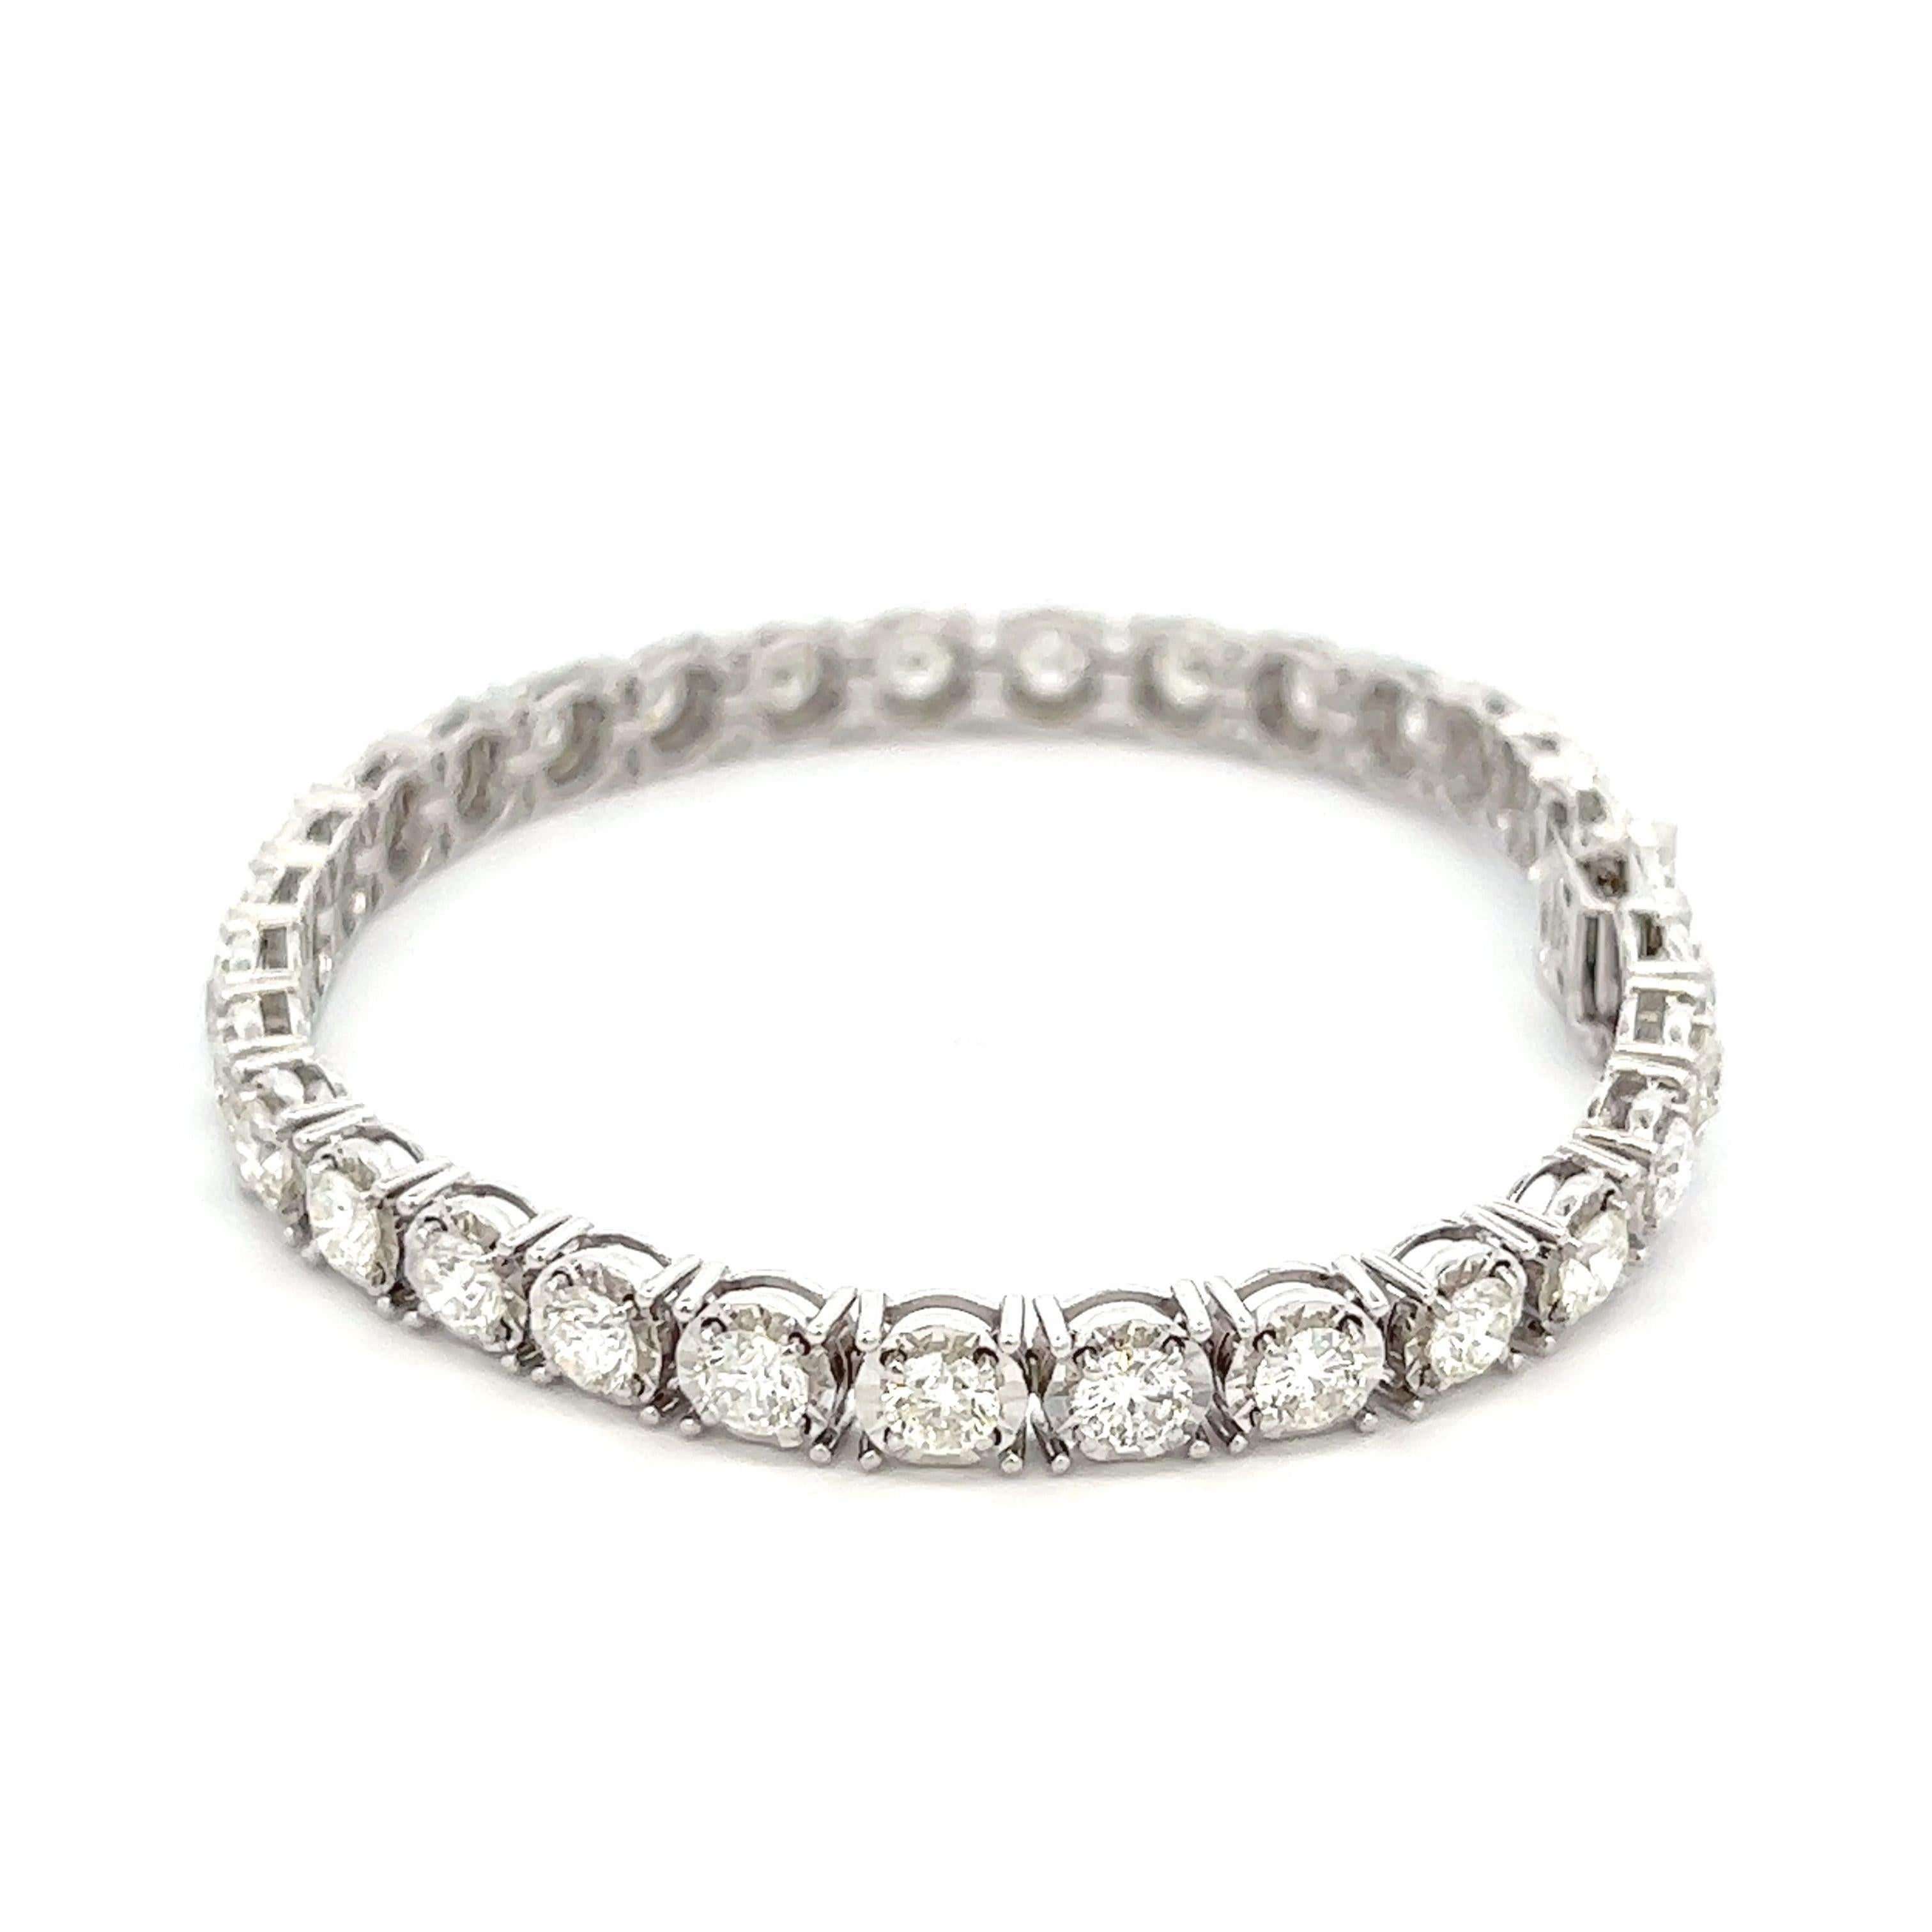 Exquisite and timeless illusion set diamonds tennis bracelet, by Alexander Beverly Hills.
31 round brilliant diamonds, 6.84 carats total. Approximately H-I color and VS1-SI1 clarity. Four prong set in 18k white gold, 16.98 grams, 7 inches.